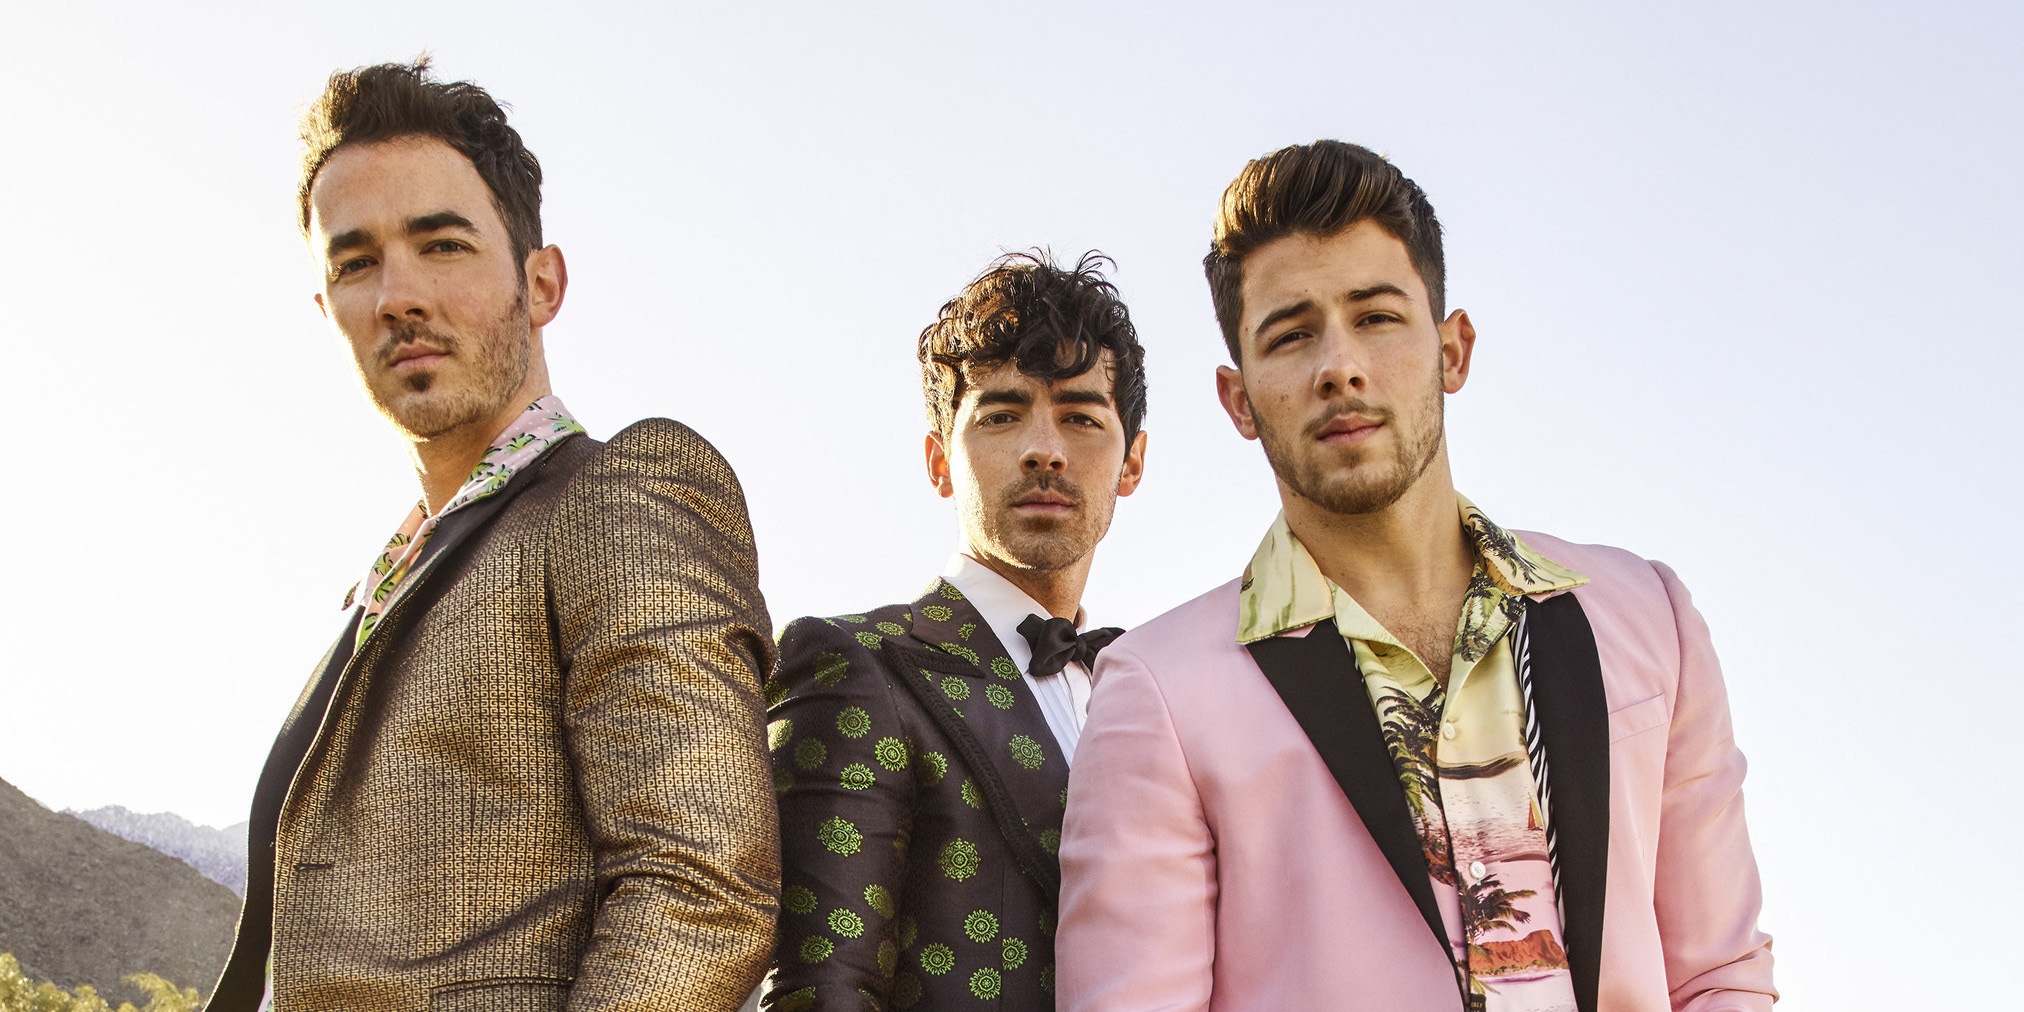 Jonas Brothers Set To Ring In 2020 At The Legendary Fontainebleau Miami